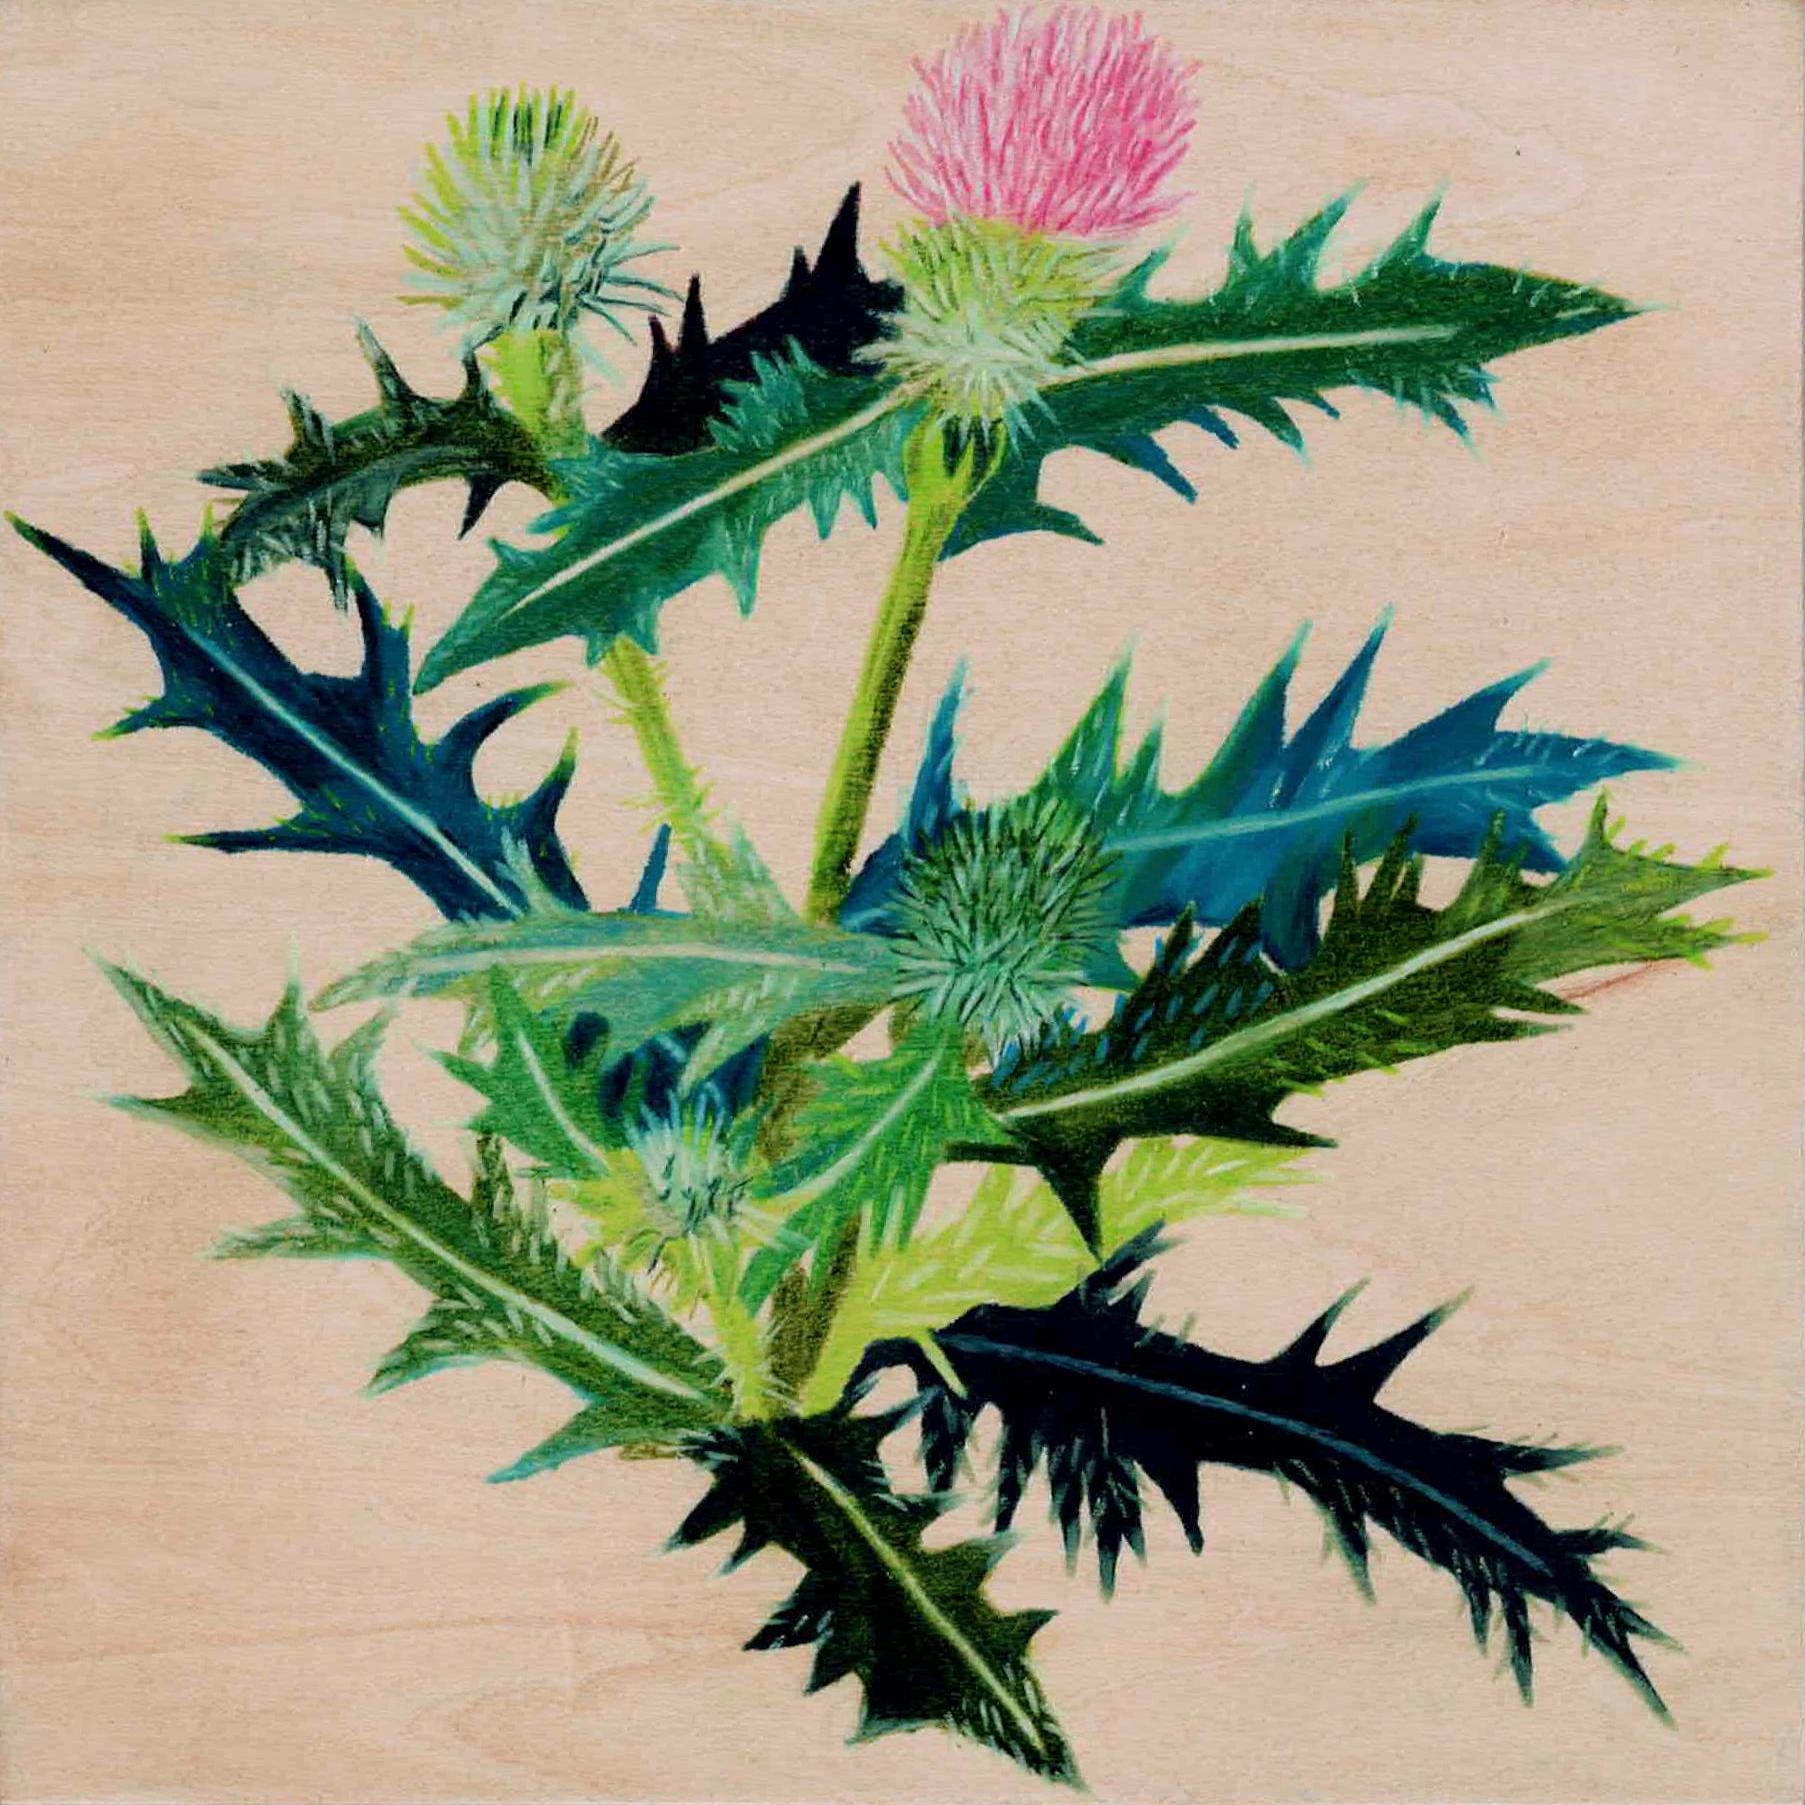 Time is Movin' : Thistle - Painting by Mitsuyo Okada